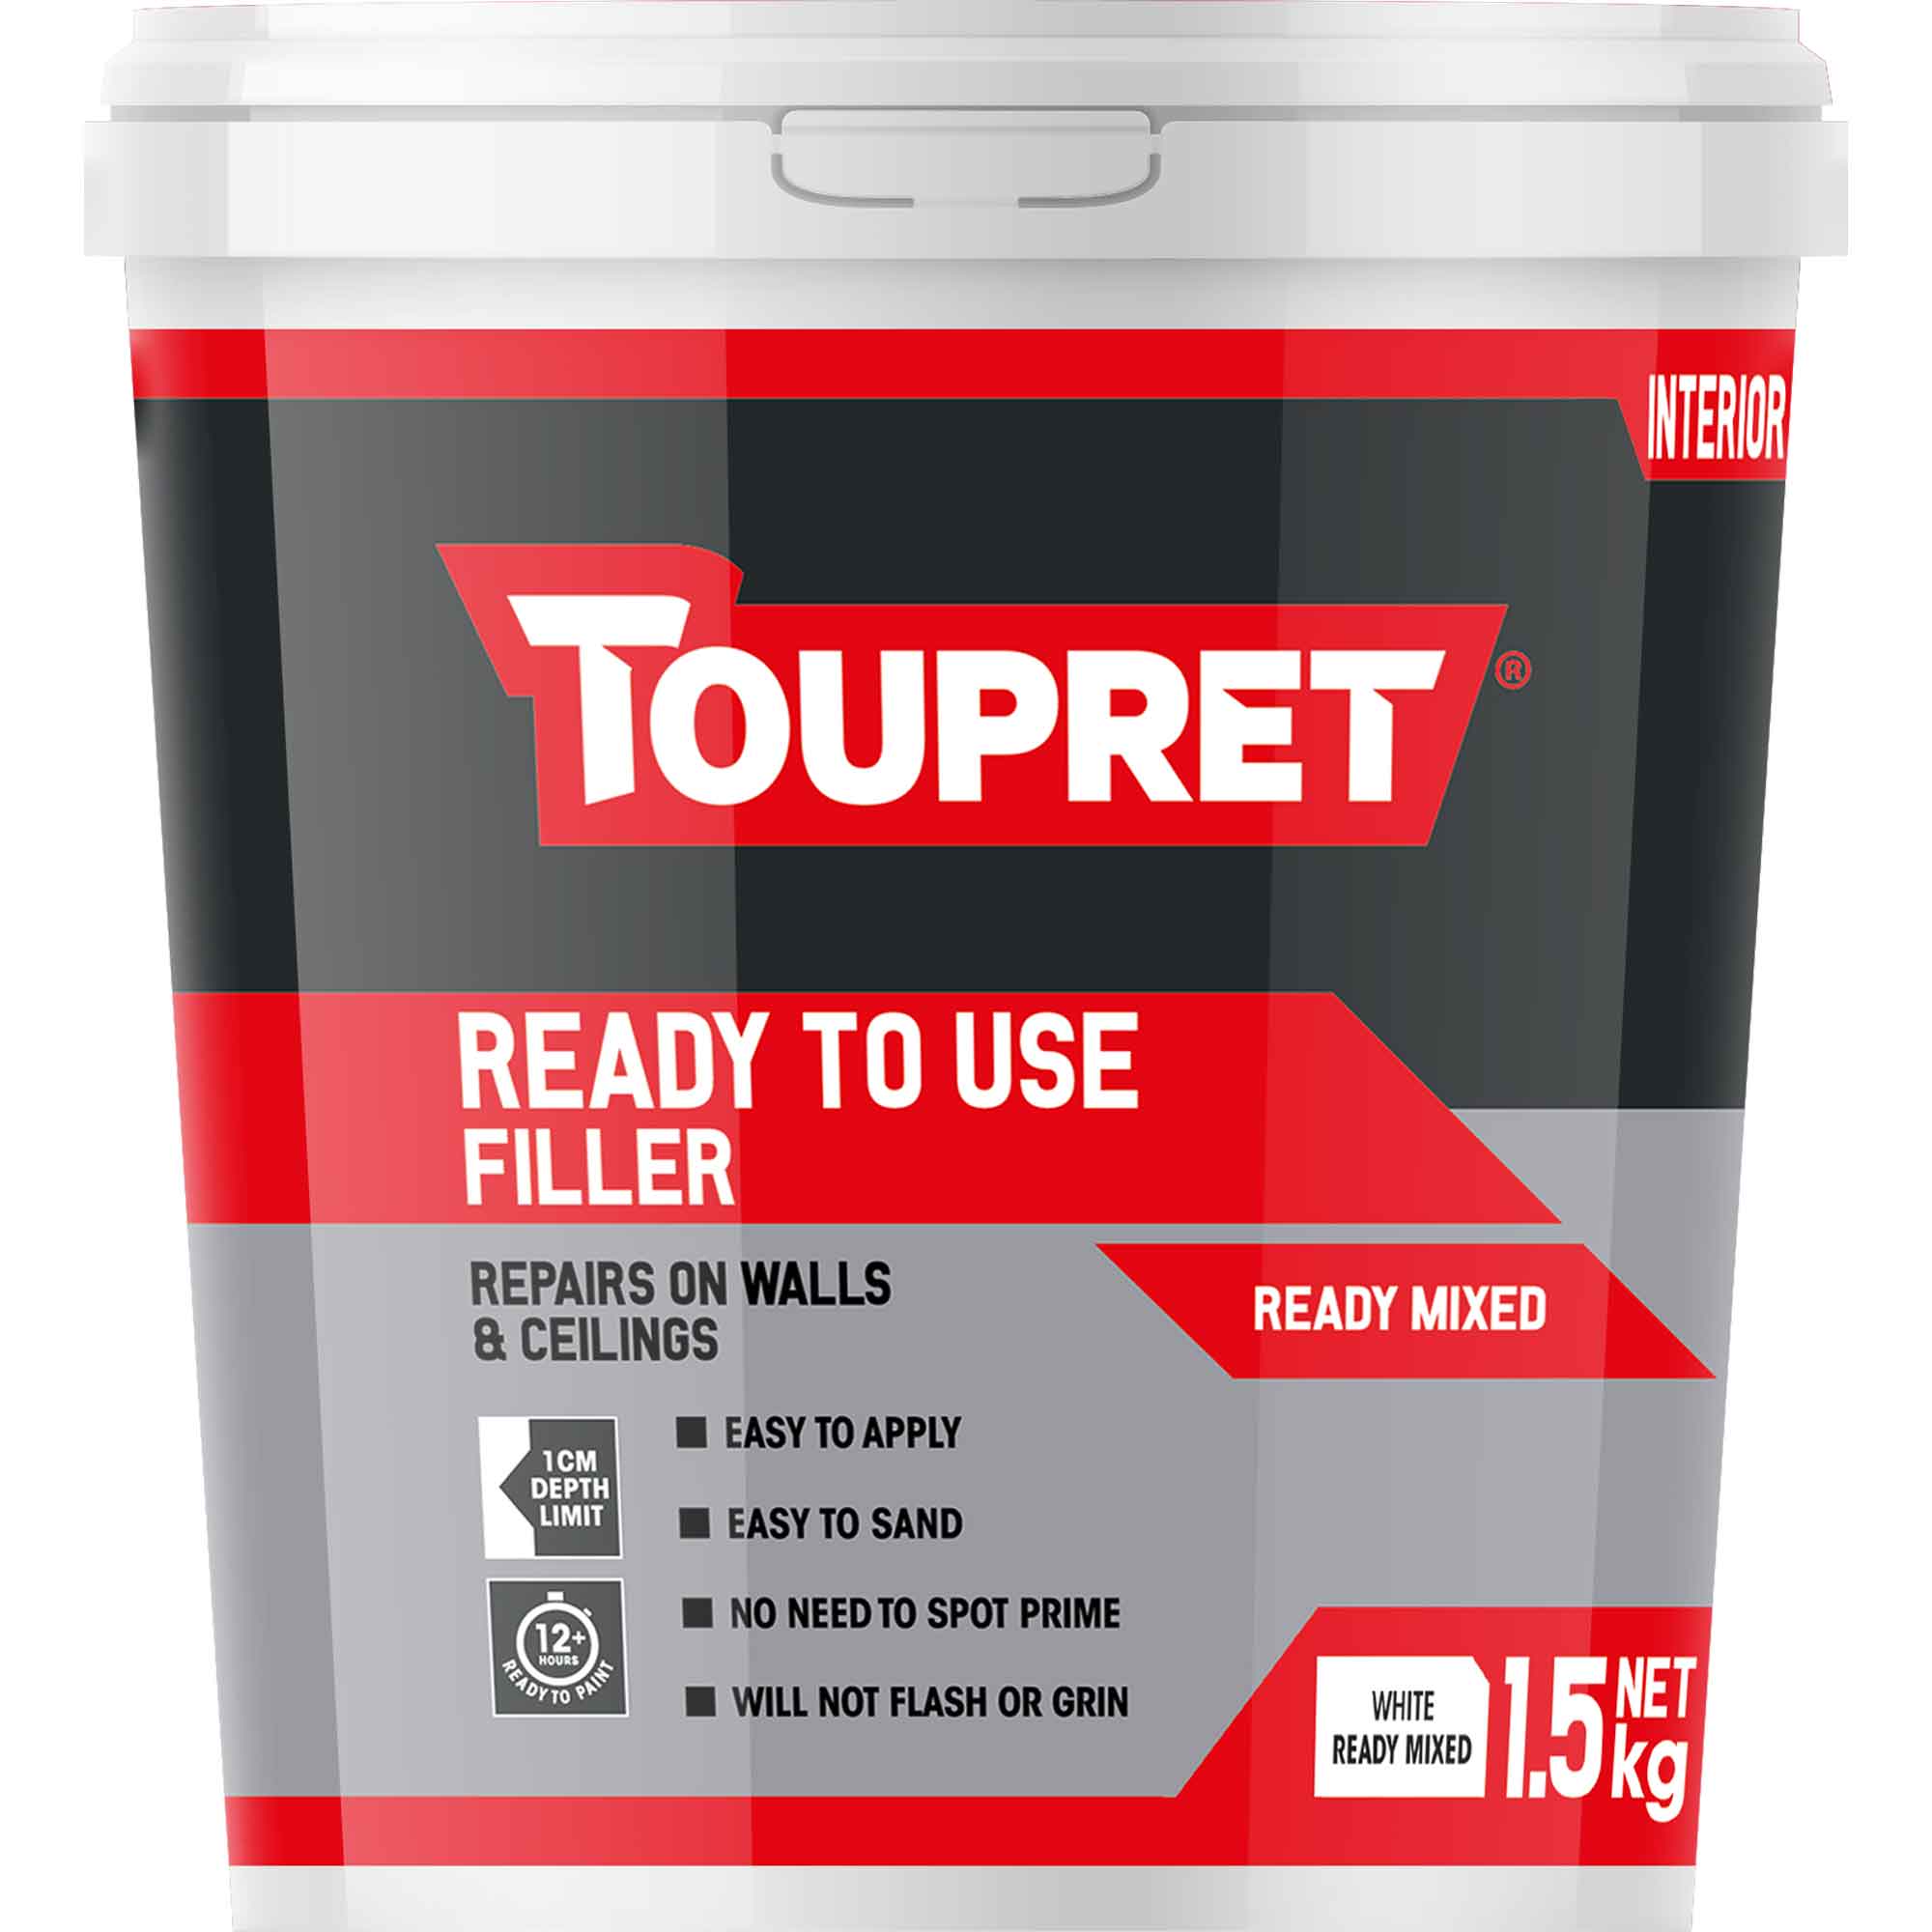 Toupret Ready Mixed All Purpose Filler White 1.5kg